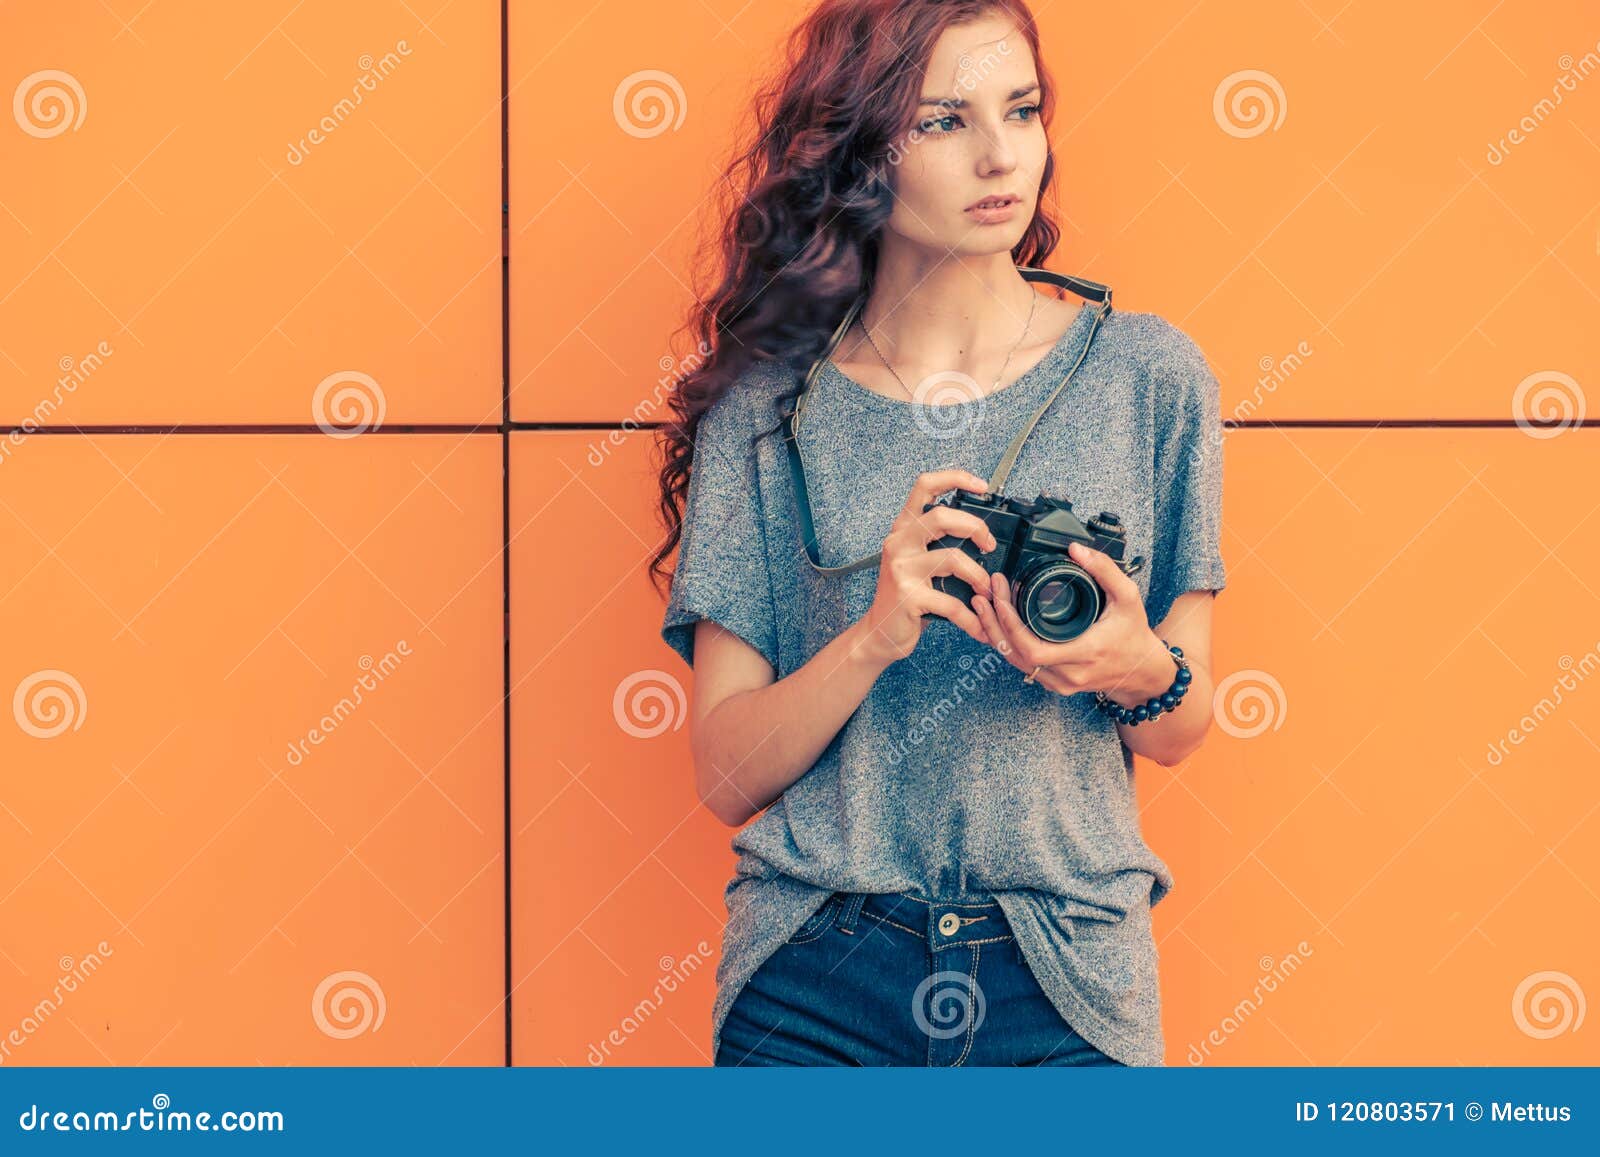 broody hipster girl photographer looking away with vintage film camera in her hands